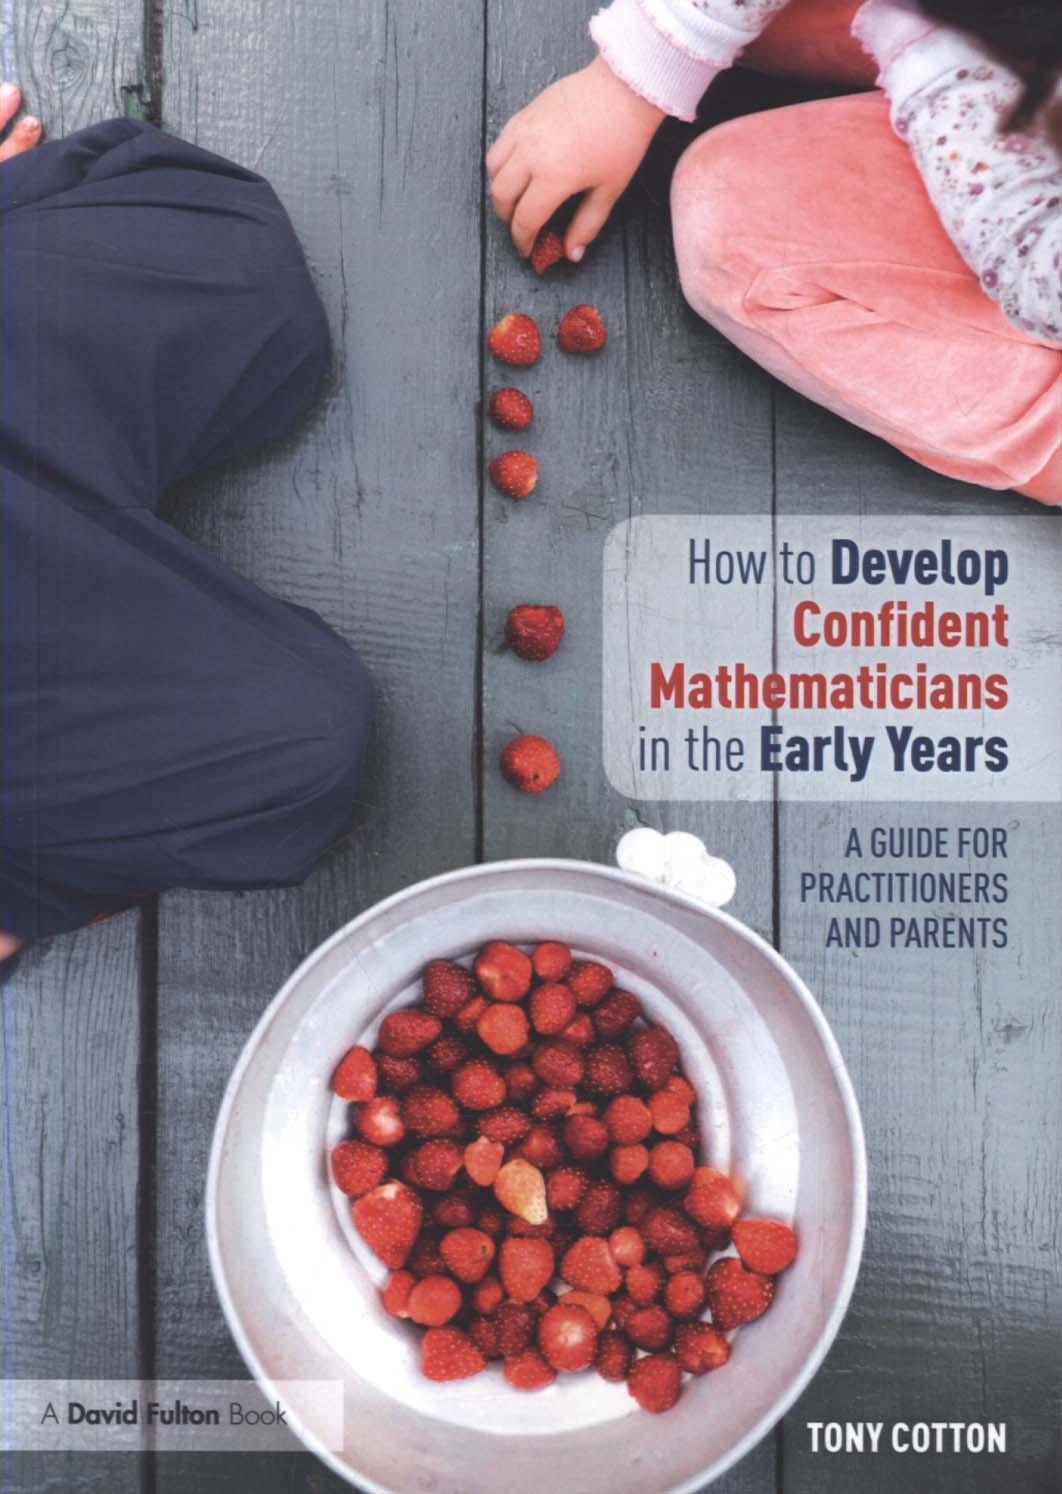 How to Develop Confident Mathematicians in the Early Years